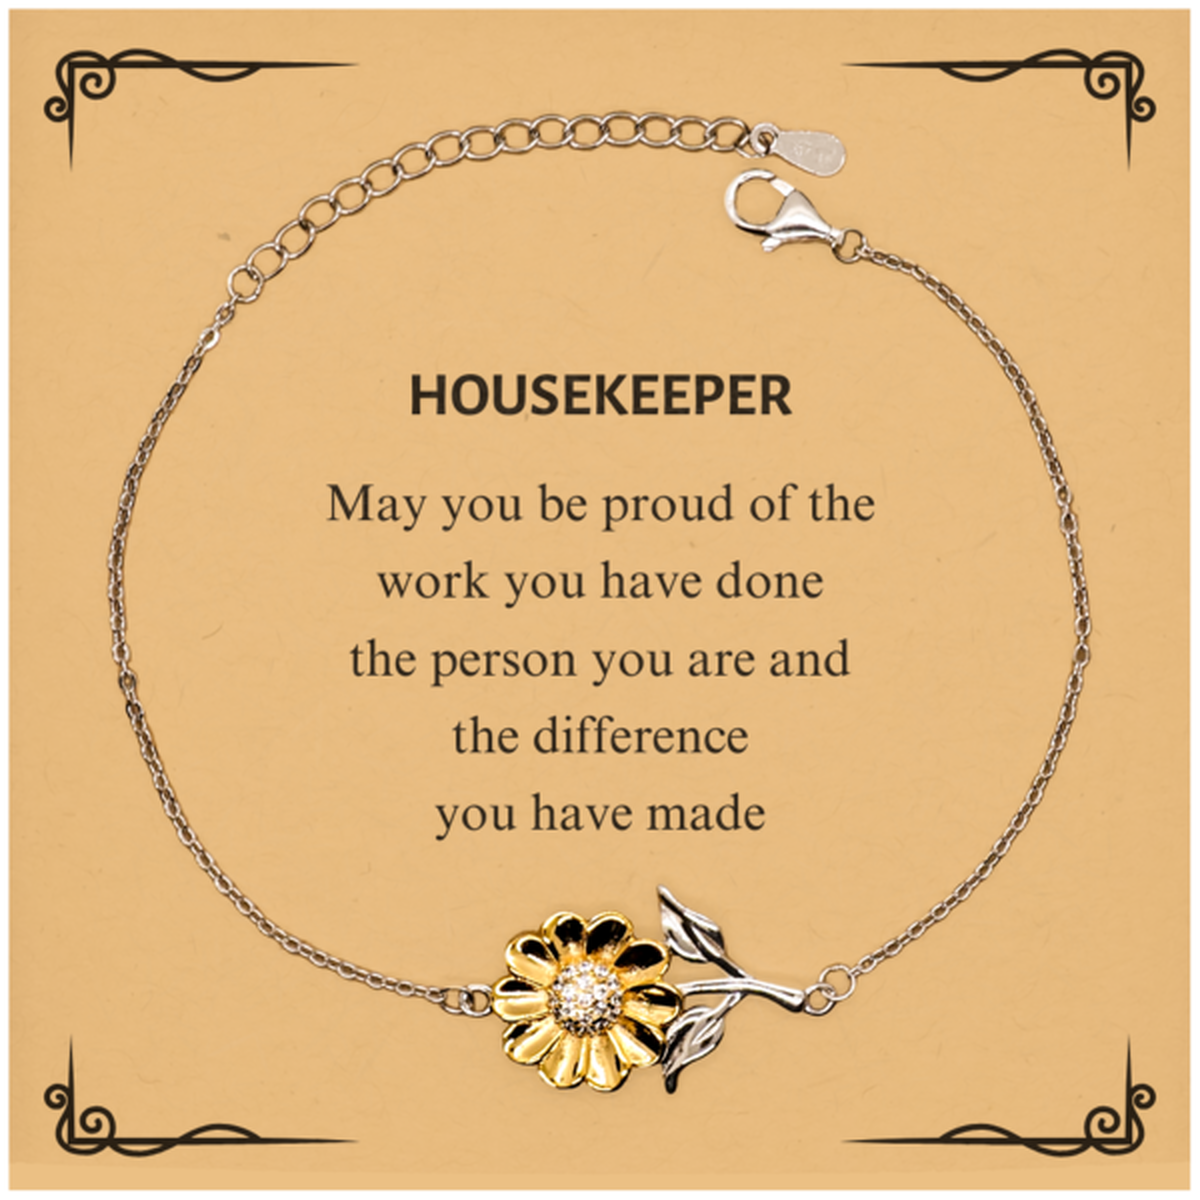 Housekeeper May you be proud of the work you have done, Retirement Housekeeper Sunflower Bracelet for Colleague Appreciation Gifts Amazing for Housekeeper